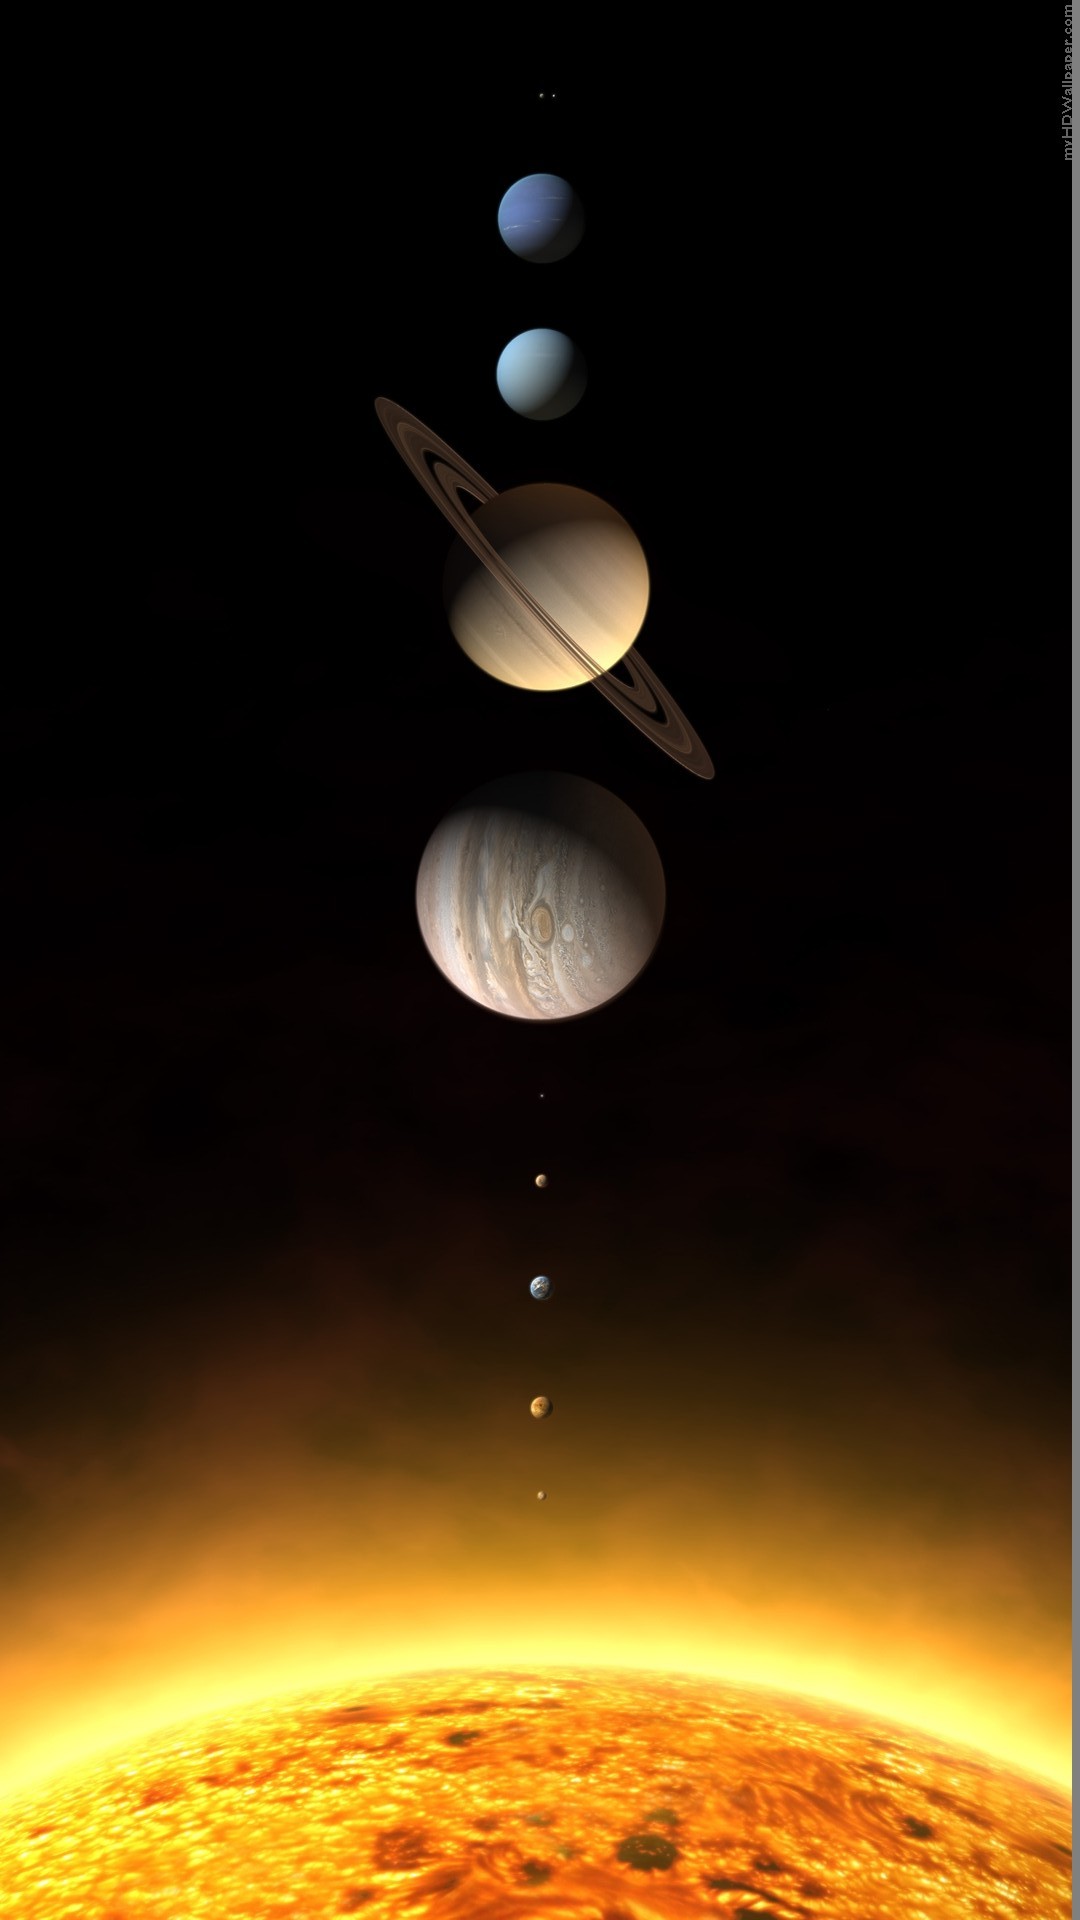 1080x1920 Realistic Solar System Planets Rendering iPhone 6+ HD Wallpaper ...